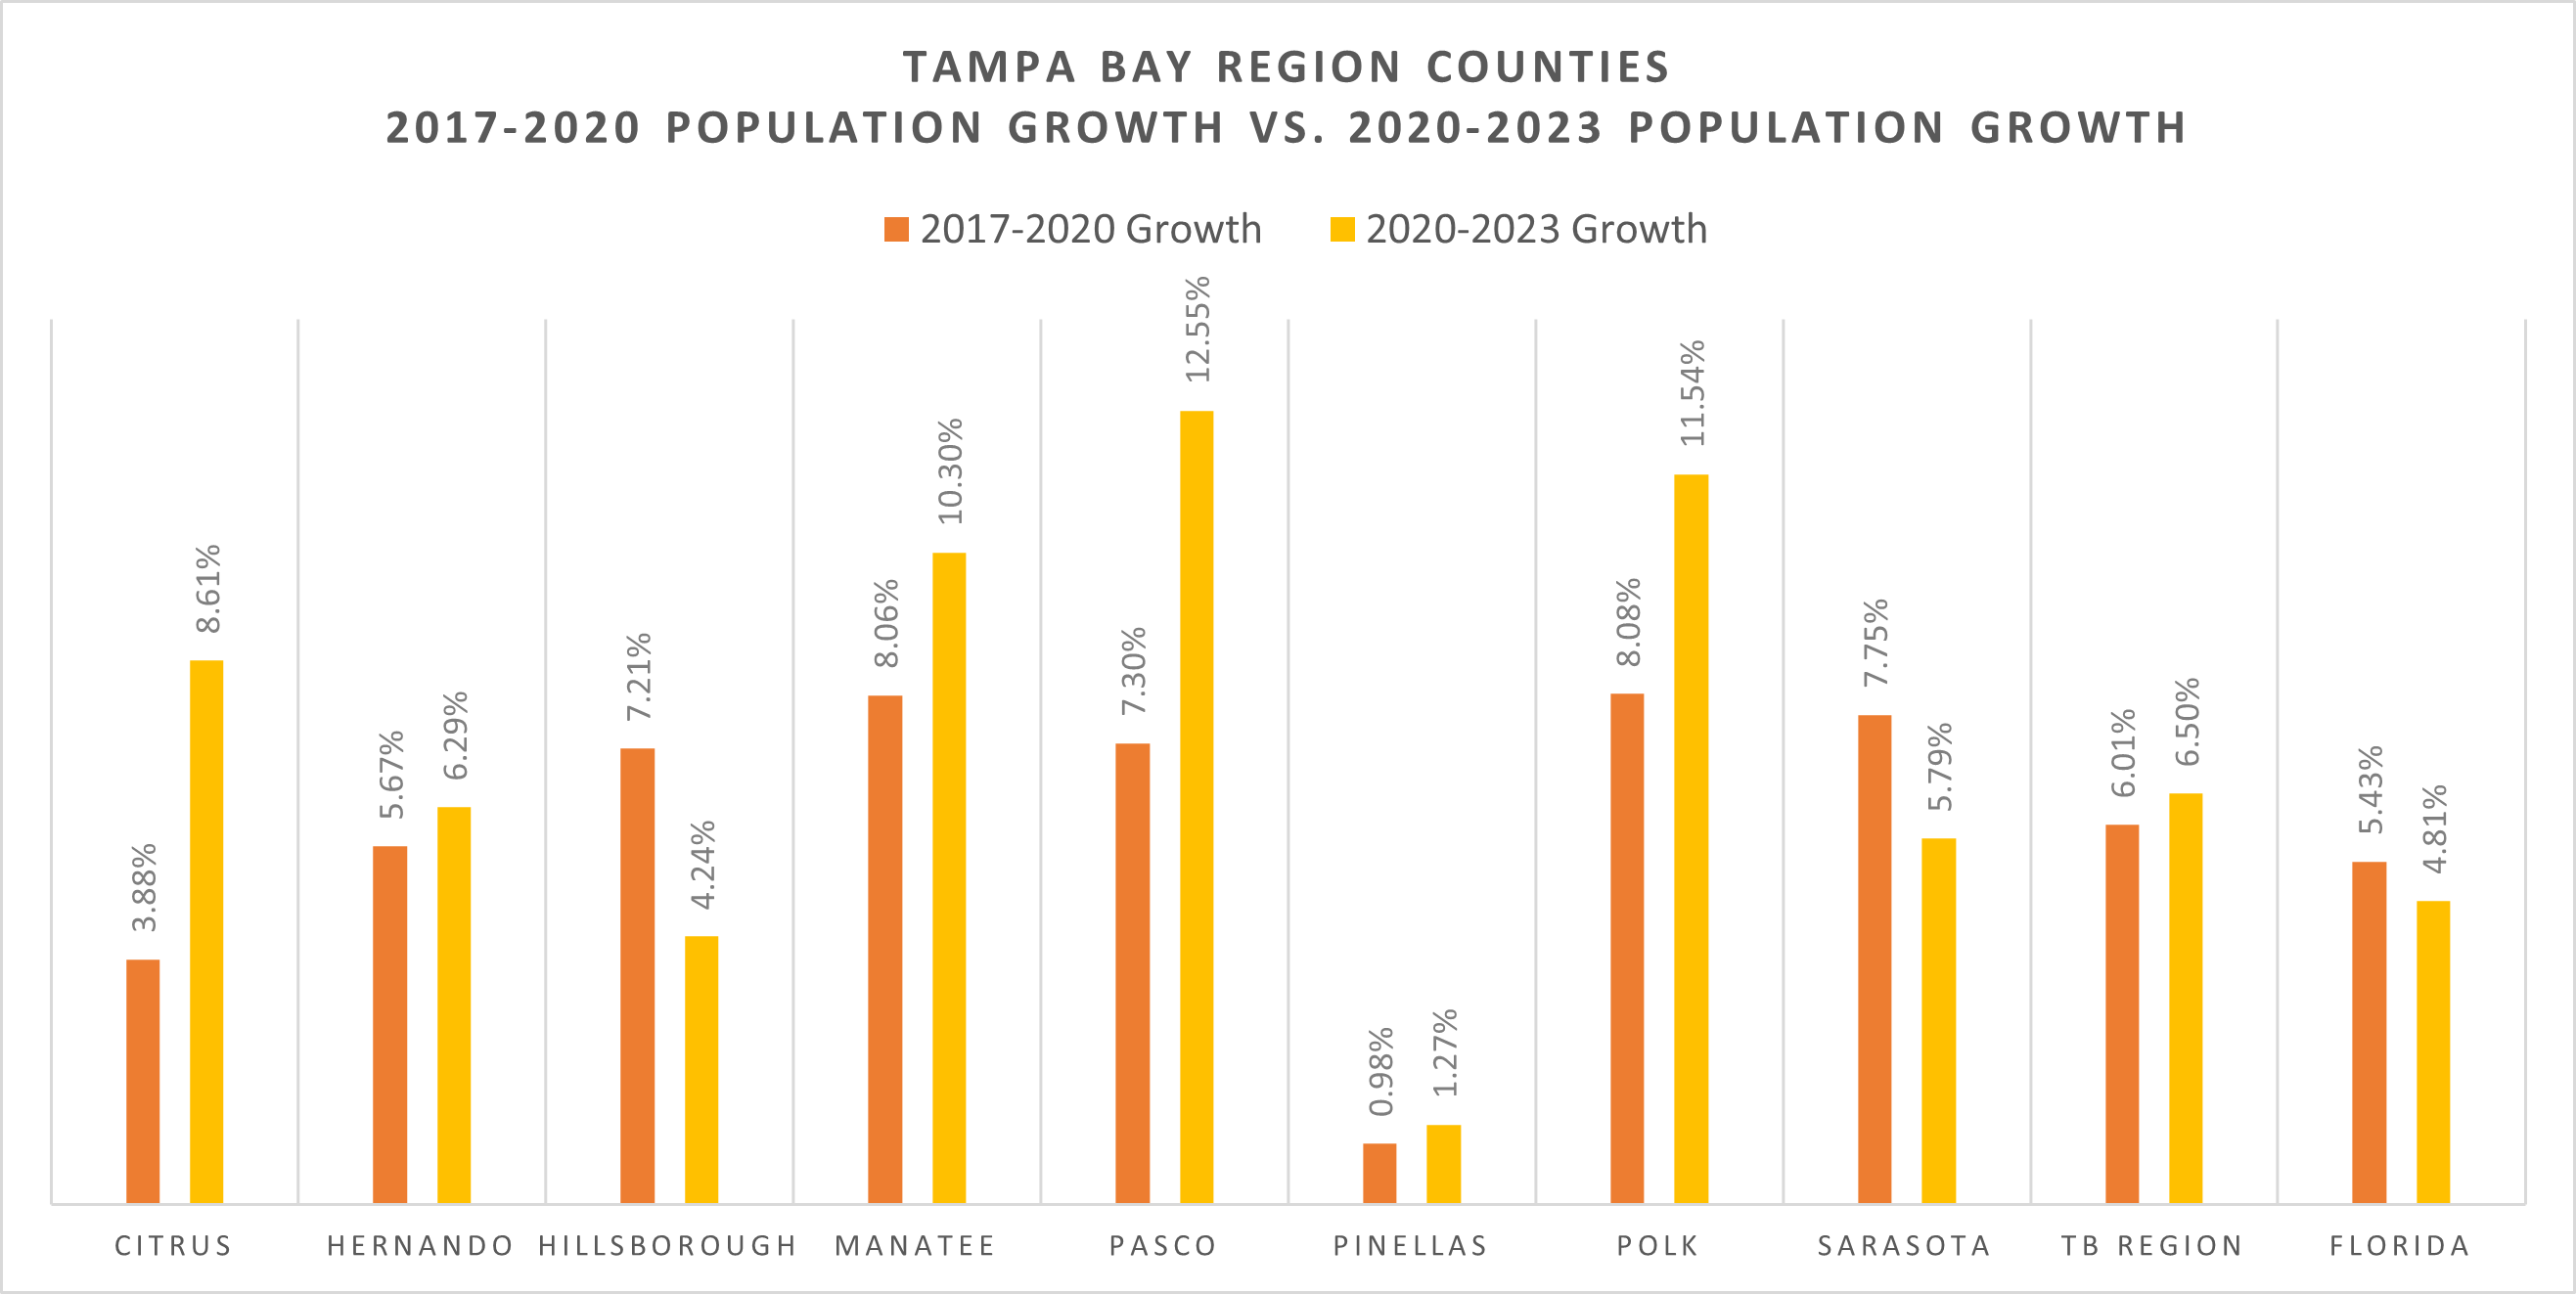 This chart shows population growth rates for periods 2017-2020 and 2020-2023 for 8 counties in the Tampa Bay Region. Citrus, Hernando, Manatee, Pasco, Pinellas, and Polk grew faster in the period 2020-2023.